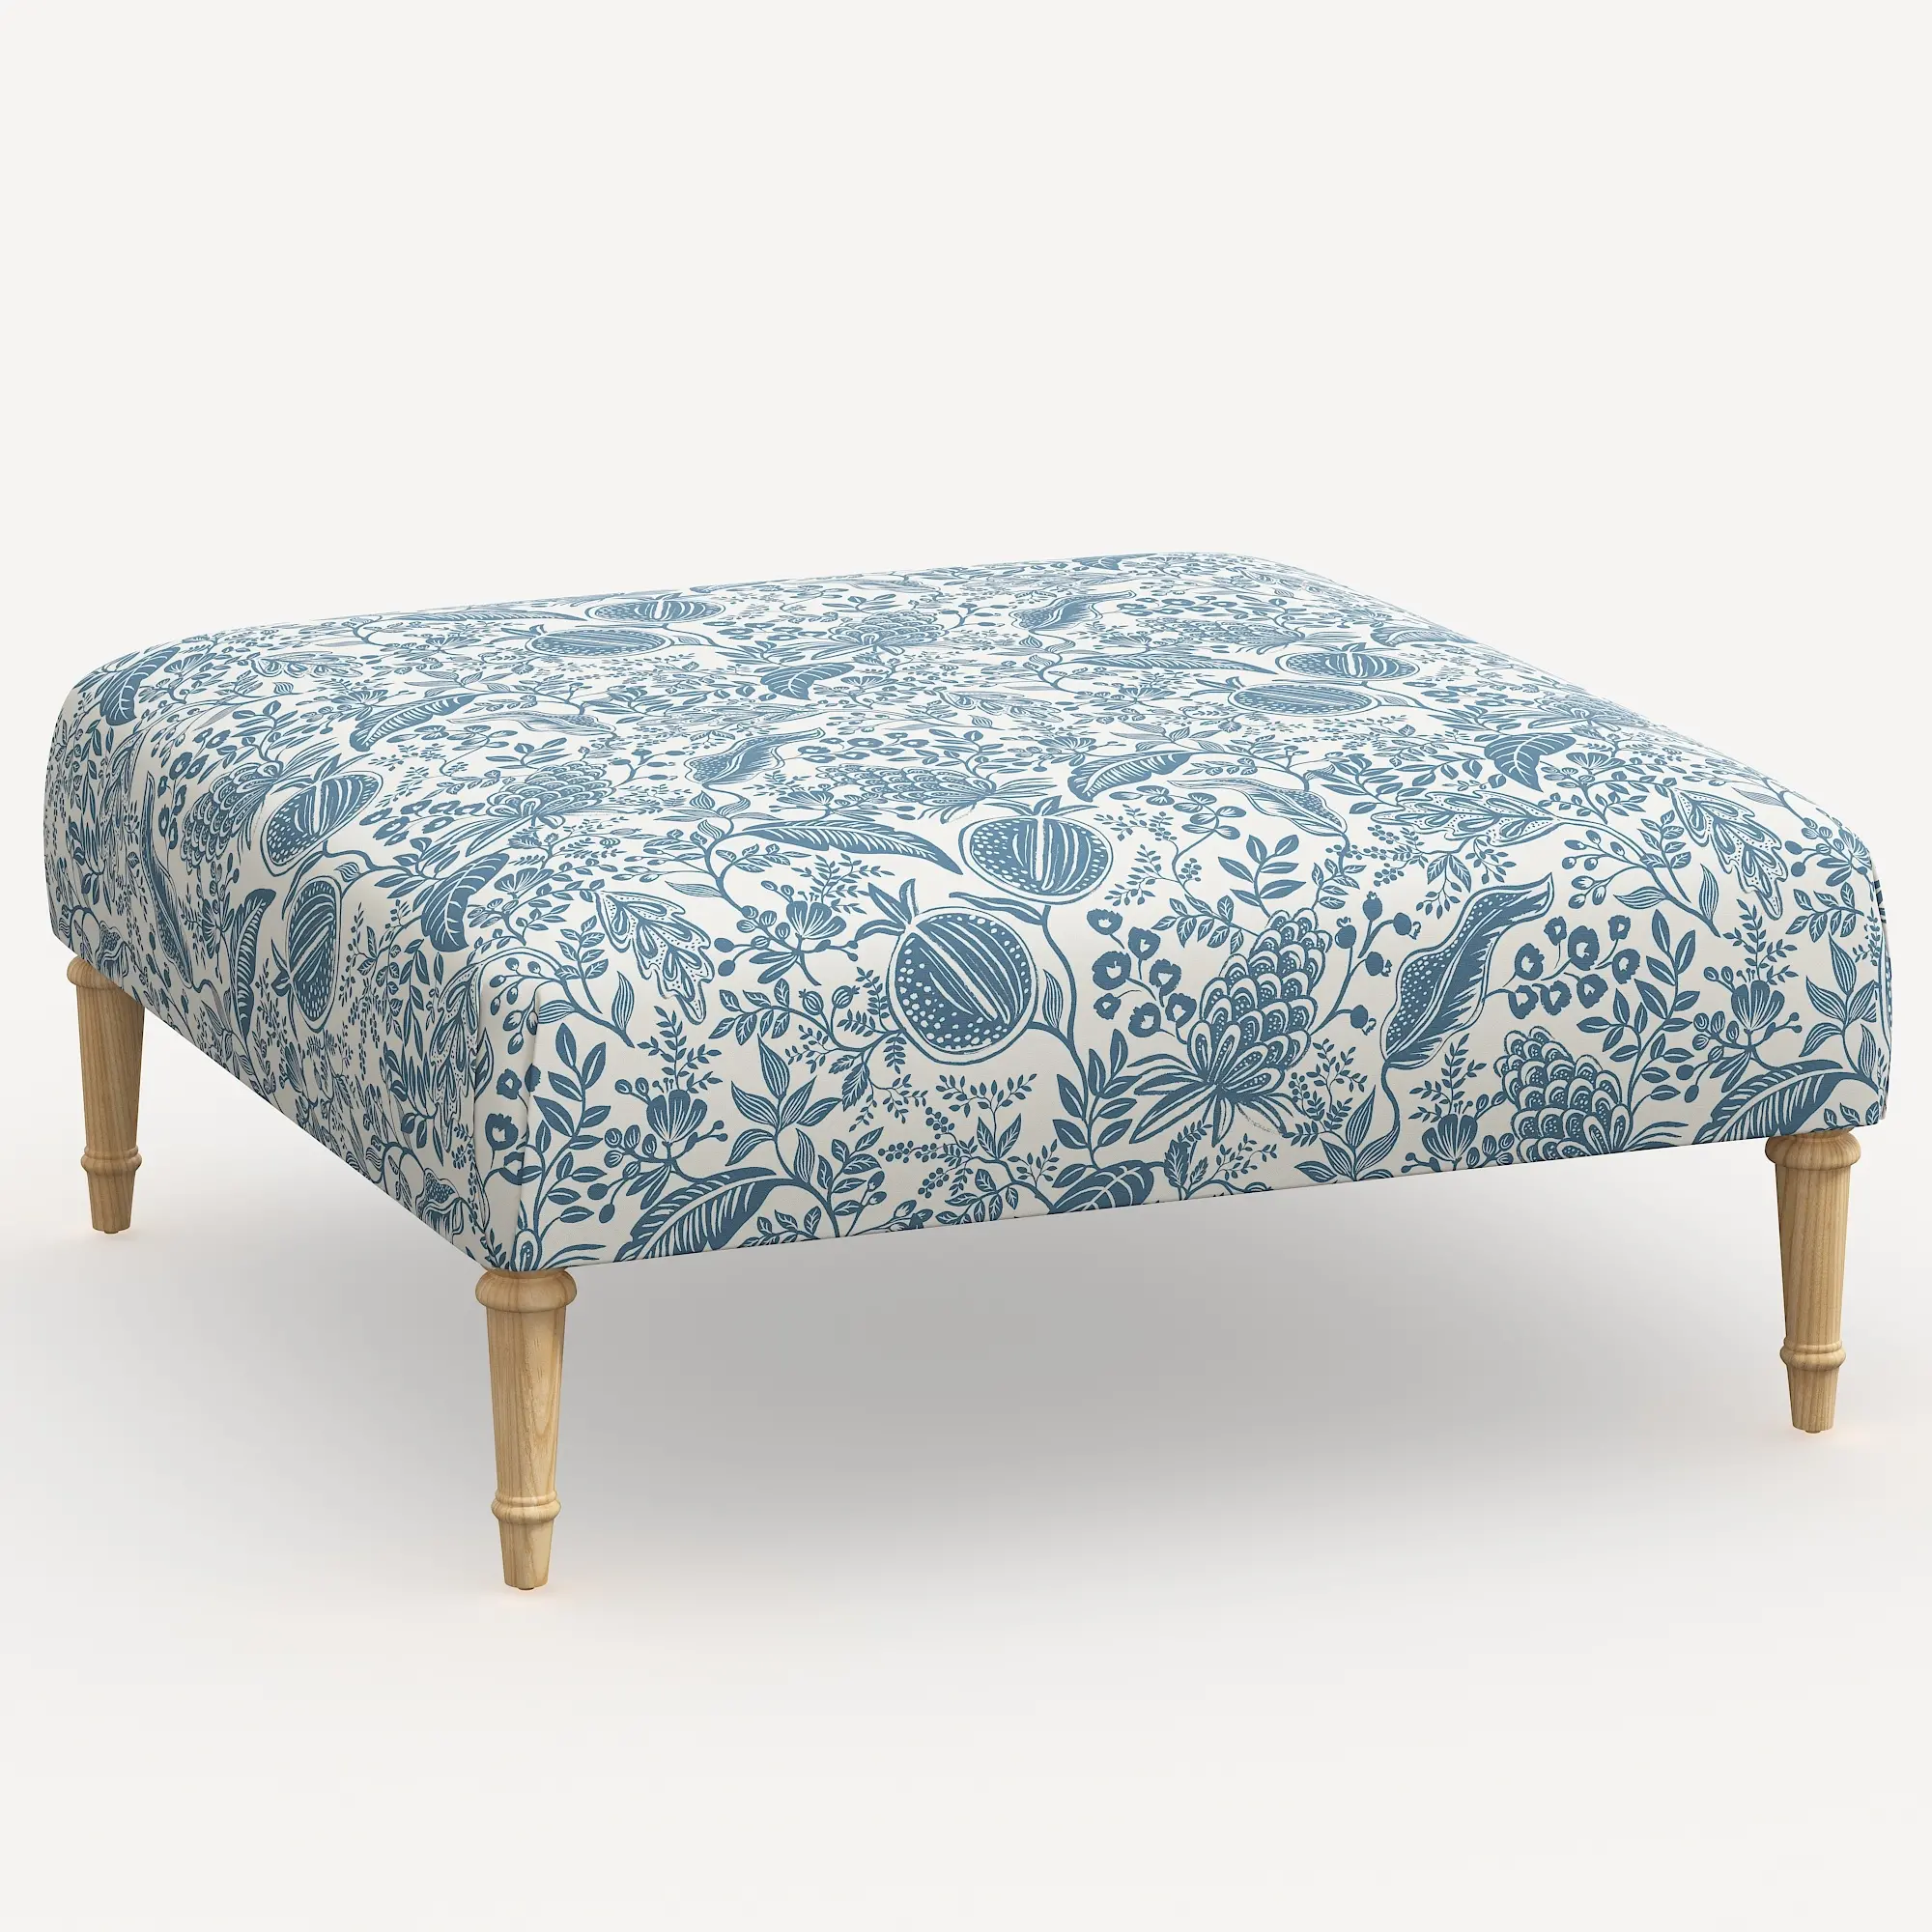 Rifle Paper Co. Greenwich Blue Pomegranate Ottoman with Natural Legs